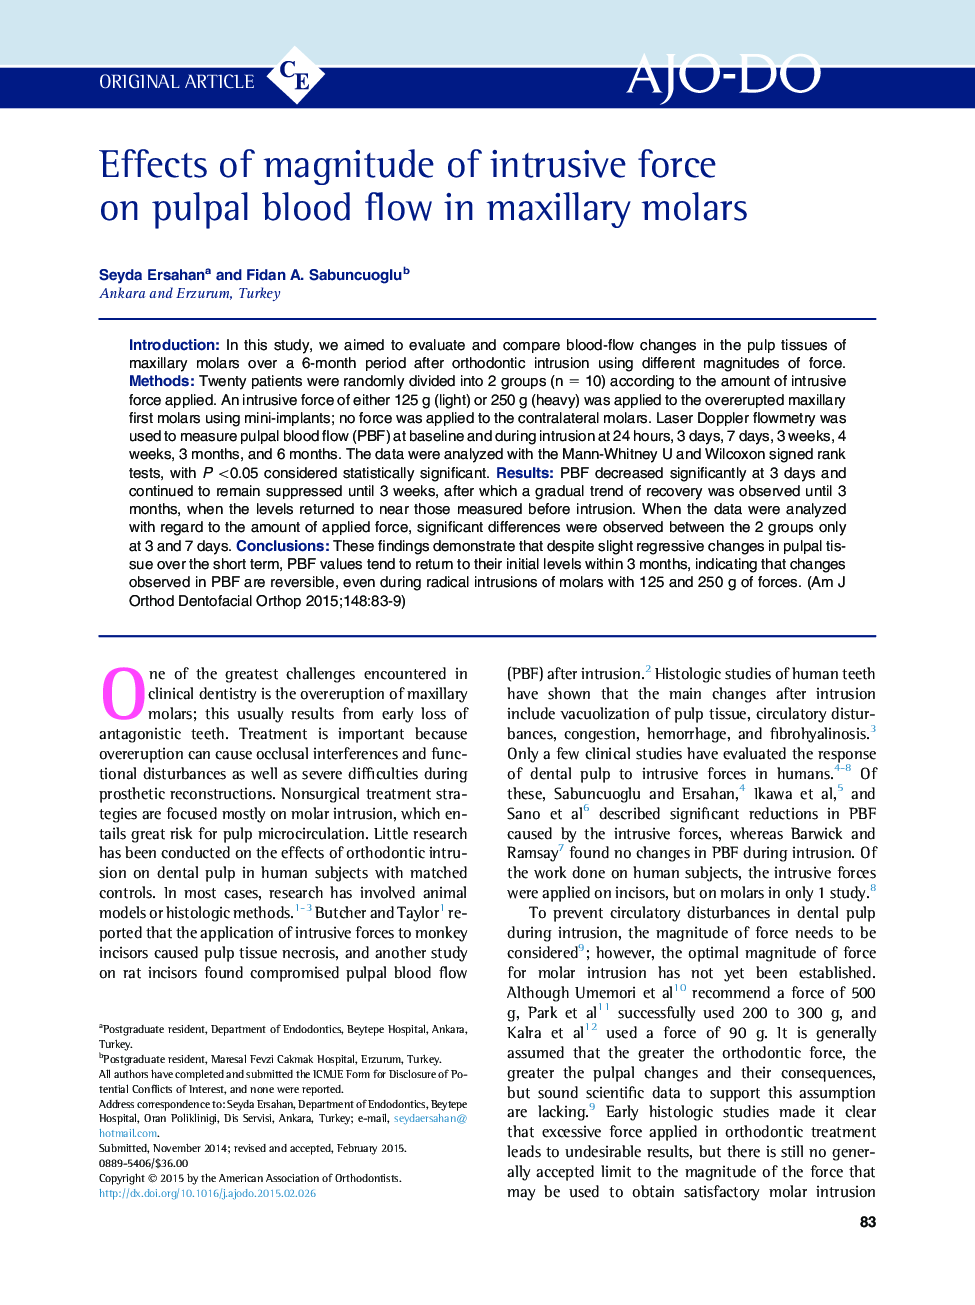 Effects of magnitude of intrusive force on pulpal blood flow in maxillary molars 